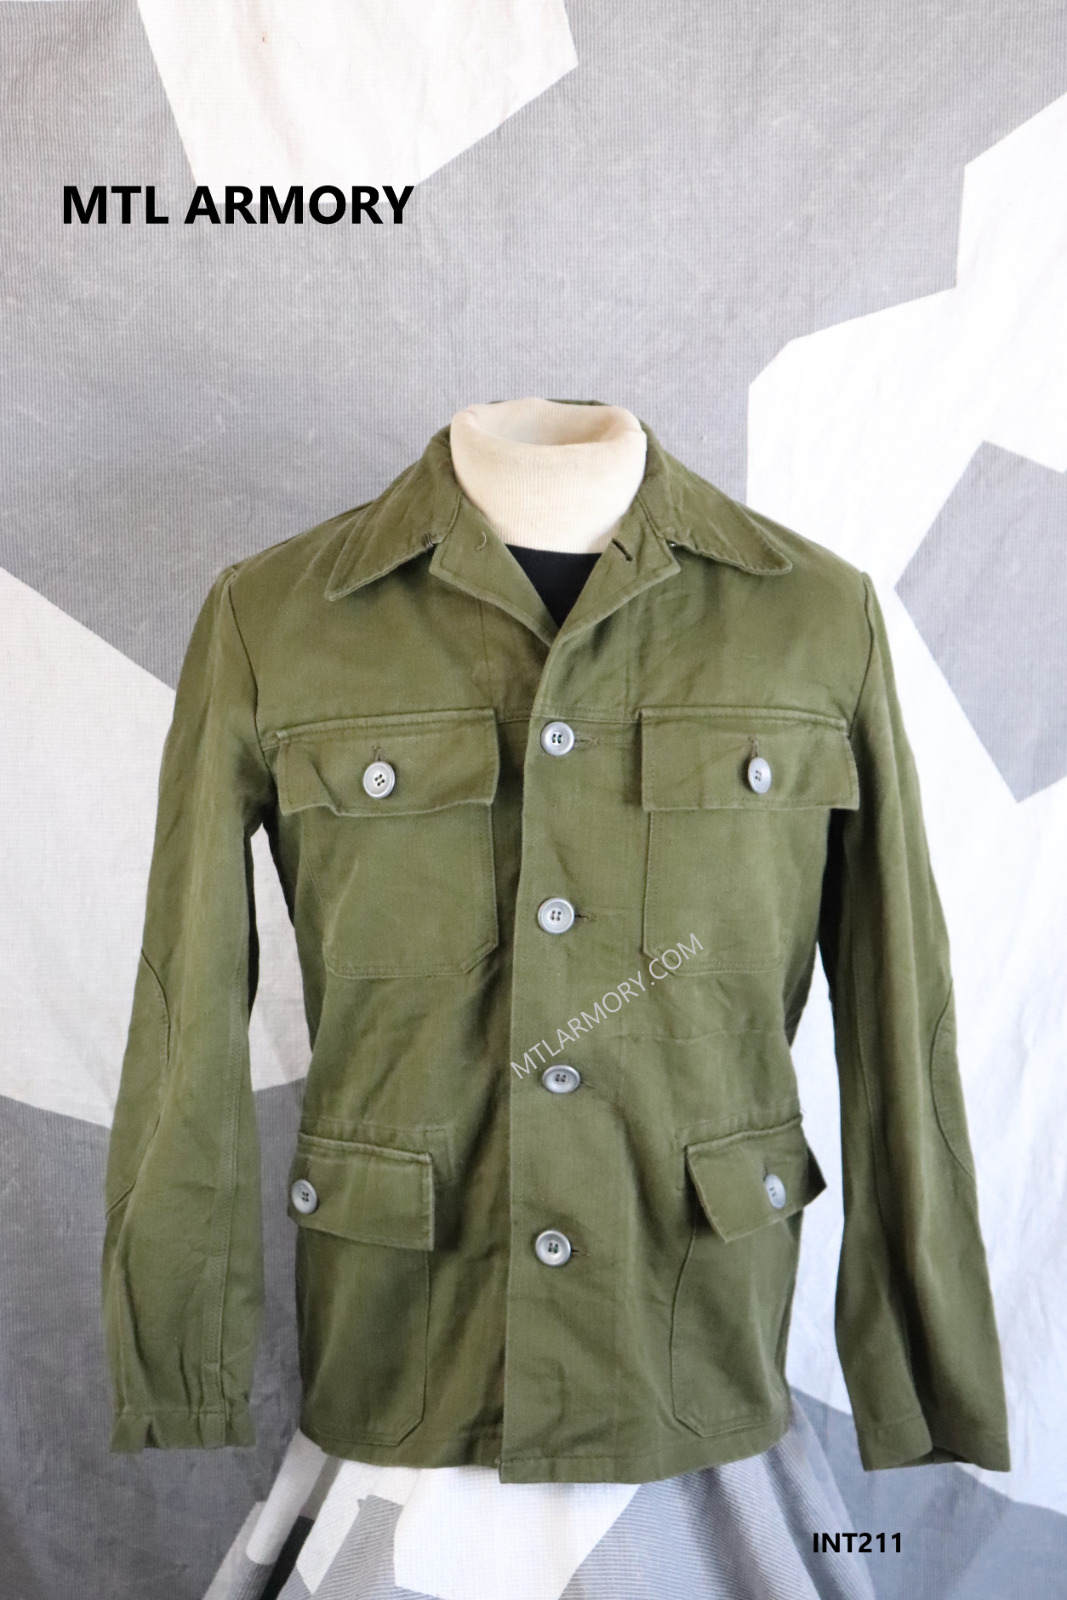 VTG GERMAN ARMY 80'S JACKET WITH METAL DISH BUTTONS ( MTL ARMORY )